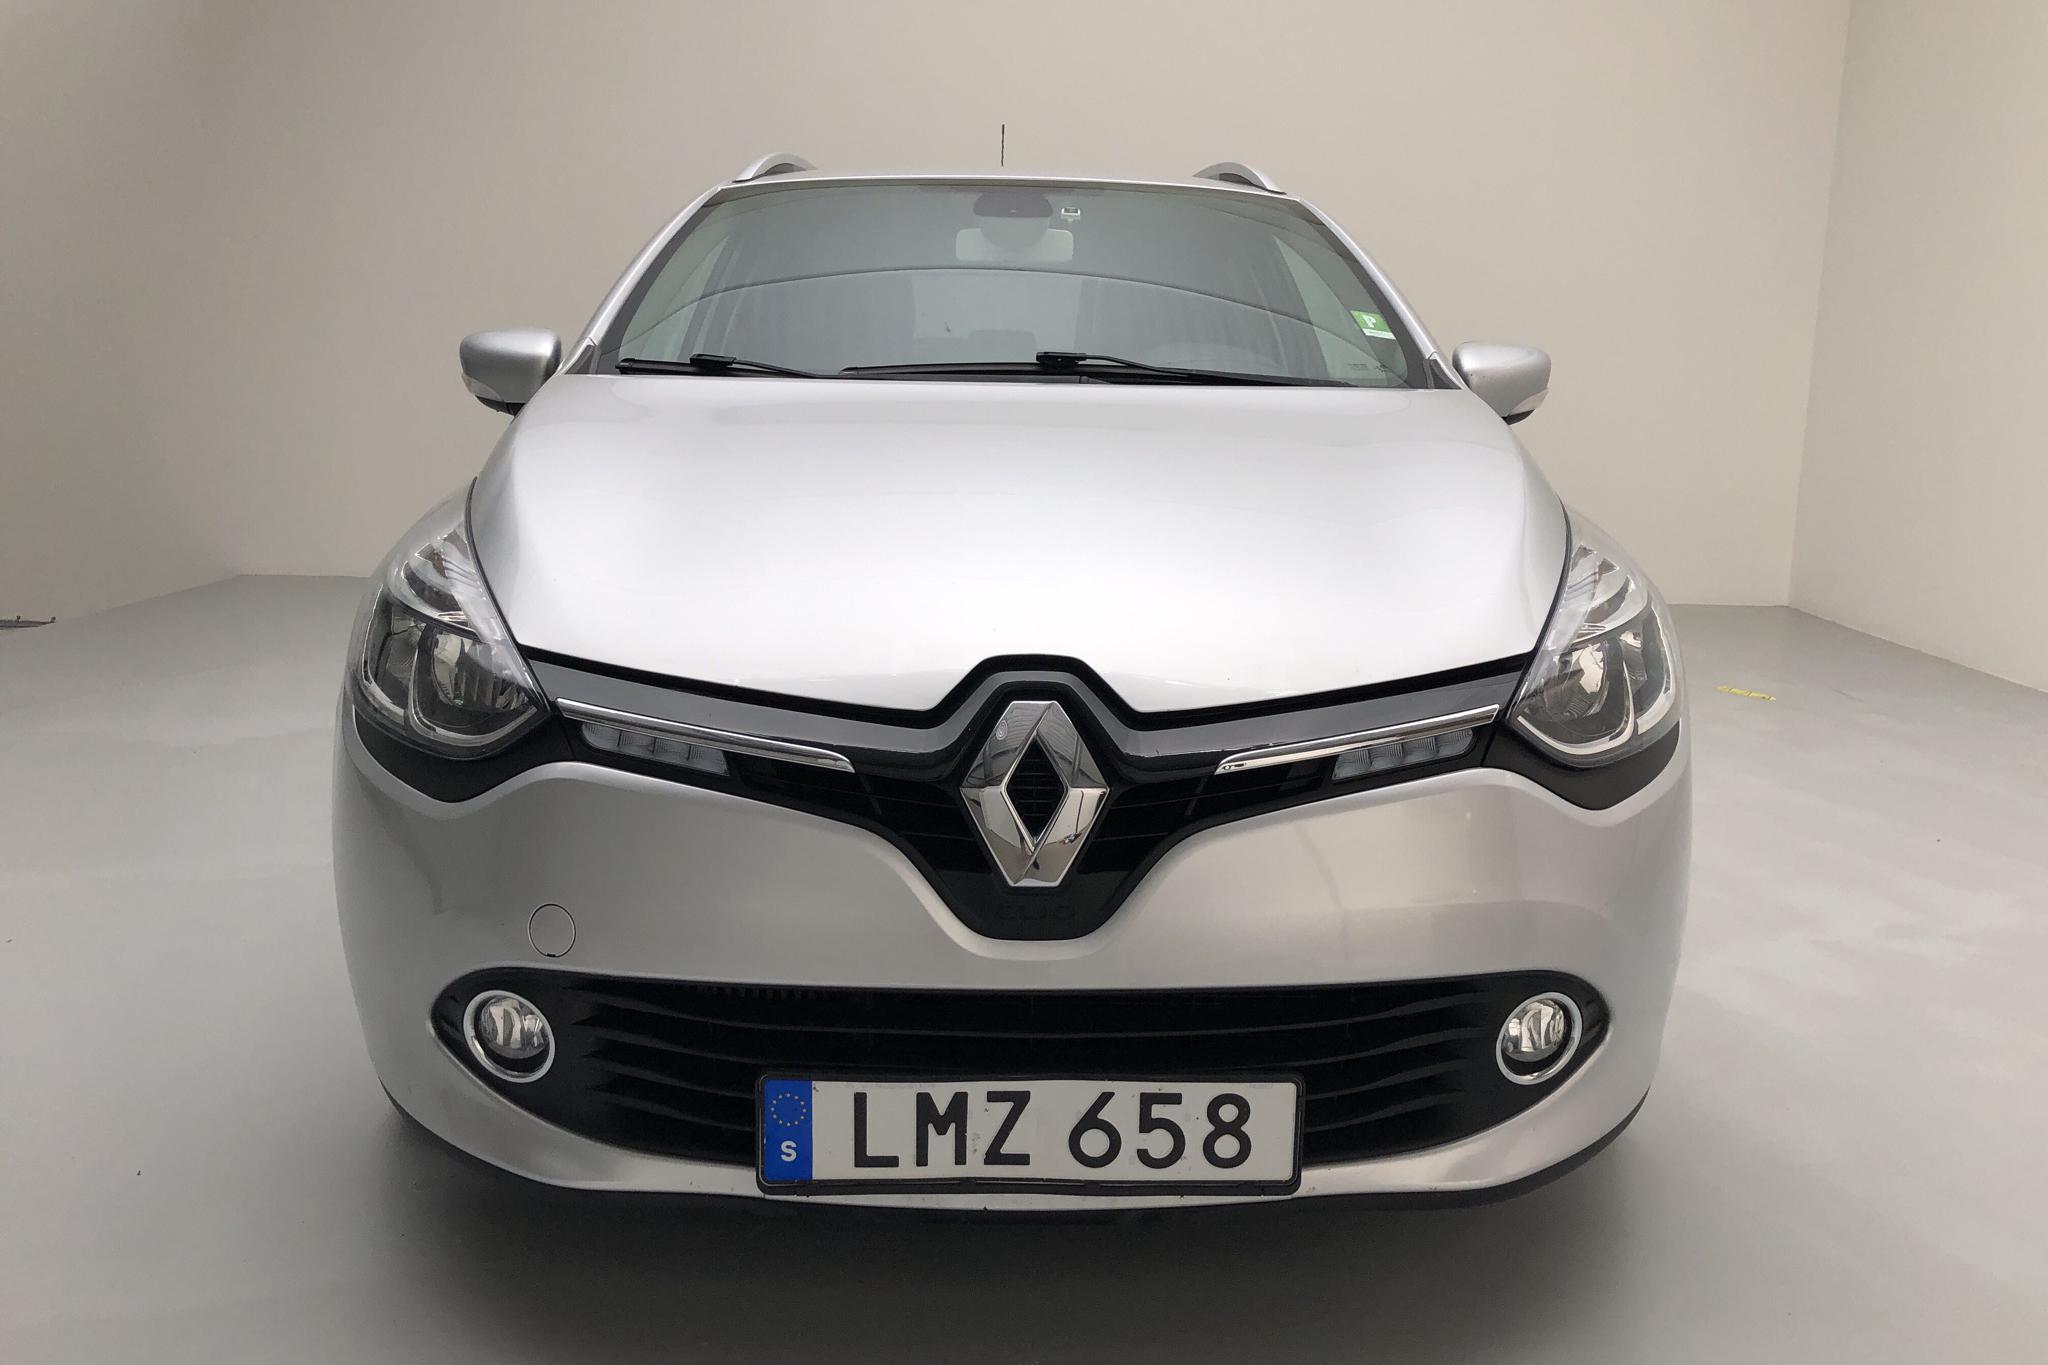 Renault Clio IV 0.9 TCe 90 Sports Tourer (90hk) - 8 208 mil - Manuell - silver - 2014